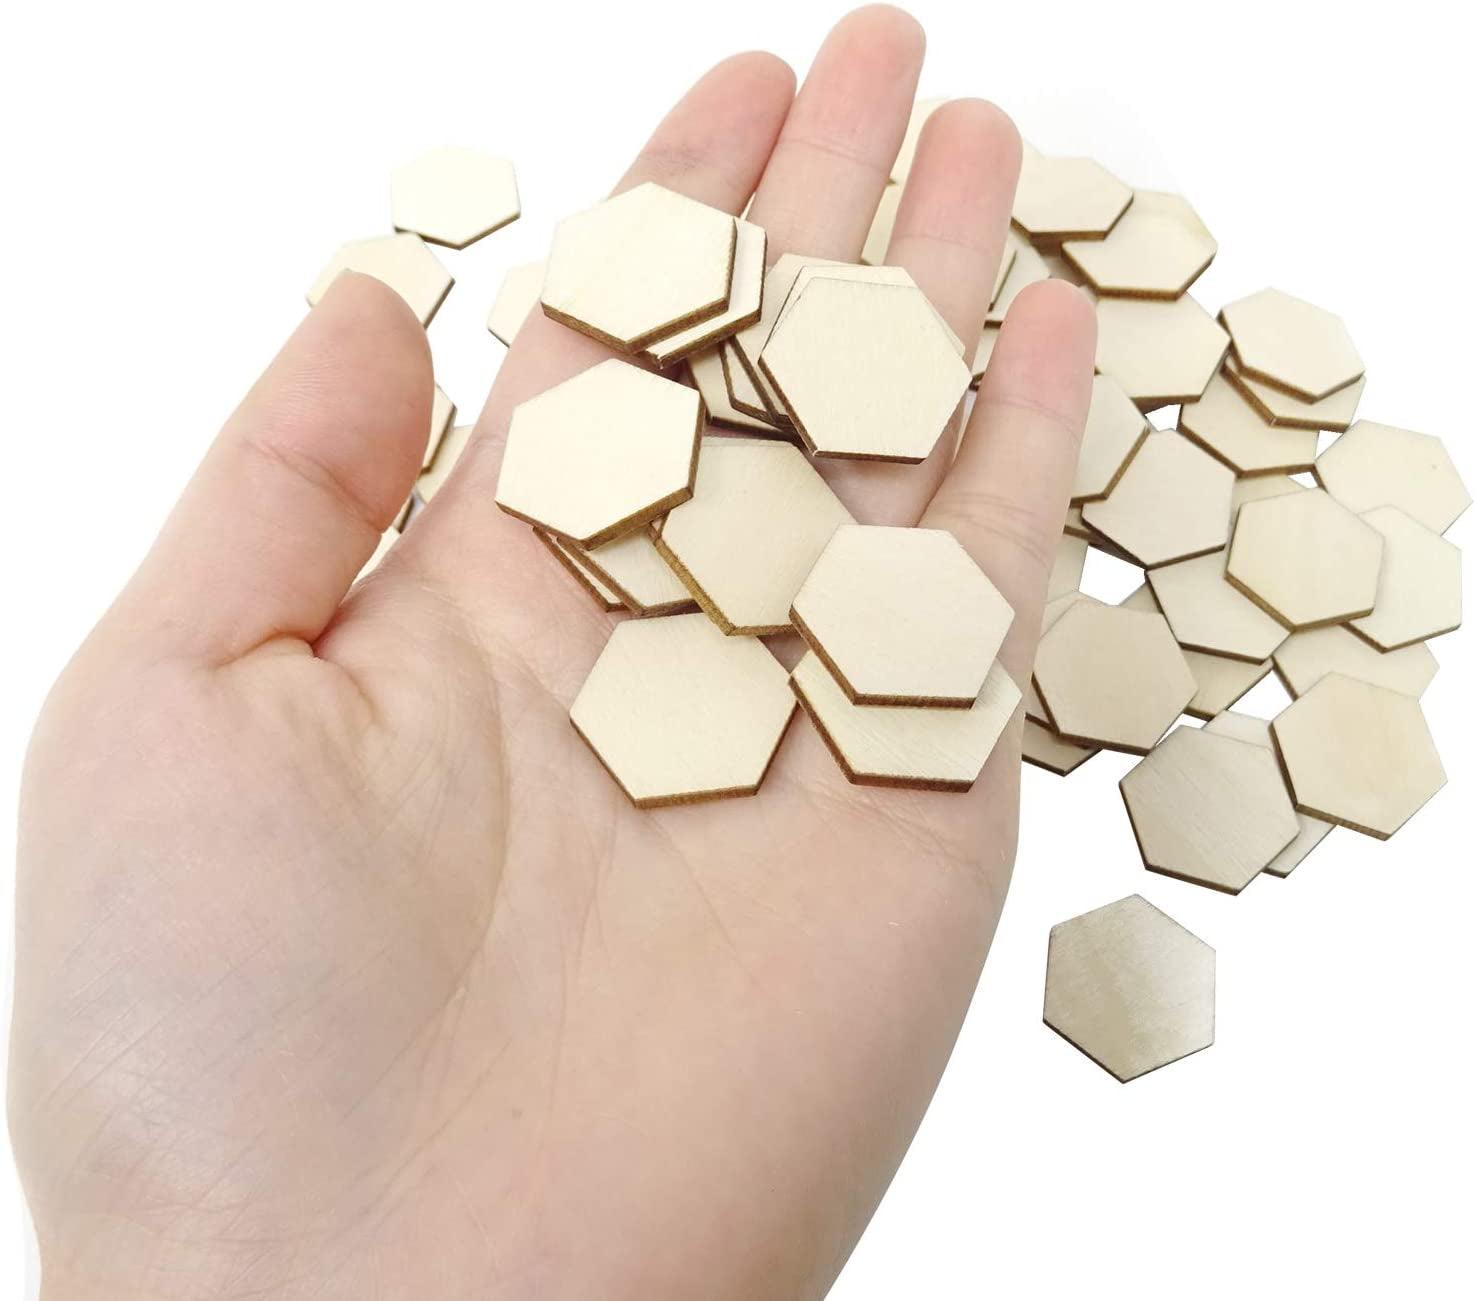 50pcs 60mm Unfinished Wood Pieces Hexagon Shaped Wooden Cutouts for DIY  Crafts,Painting,Christmas,Home Decorations - AliExpress